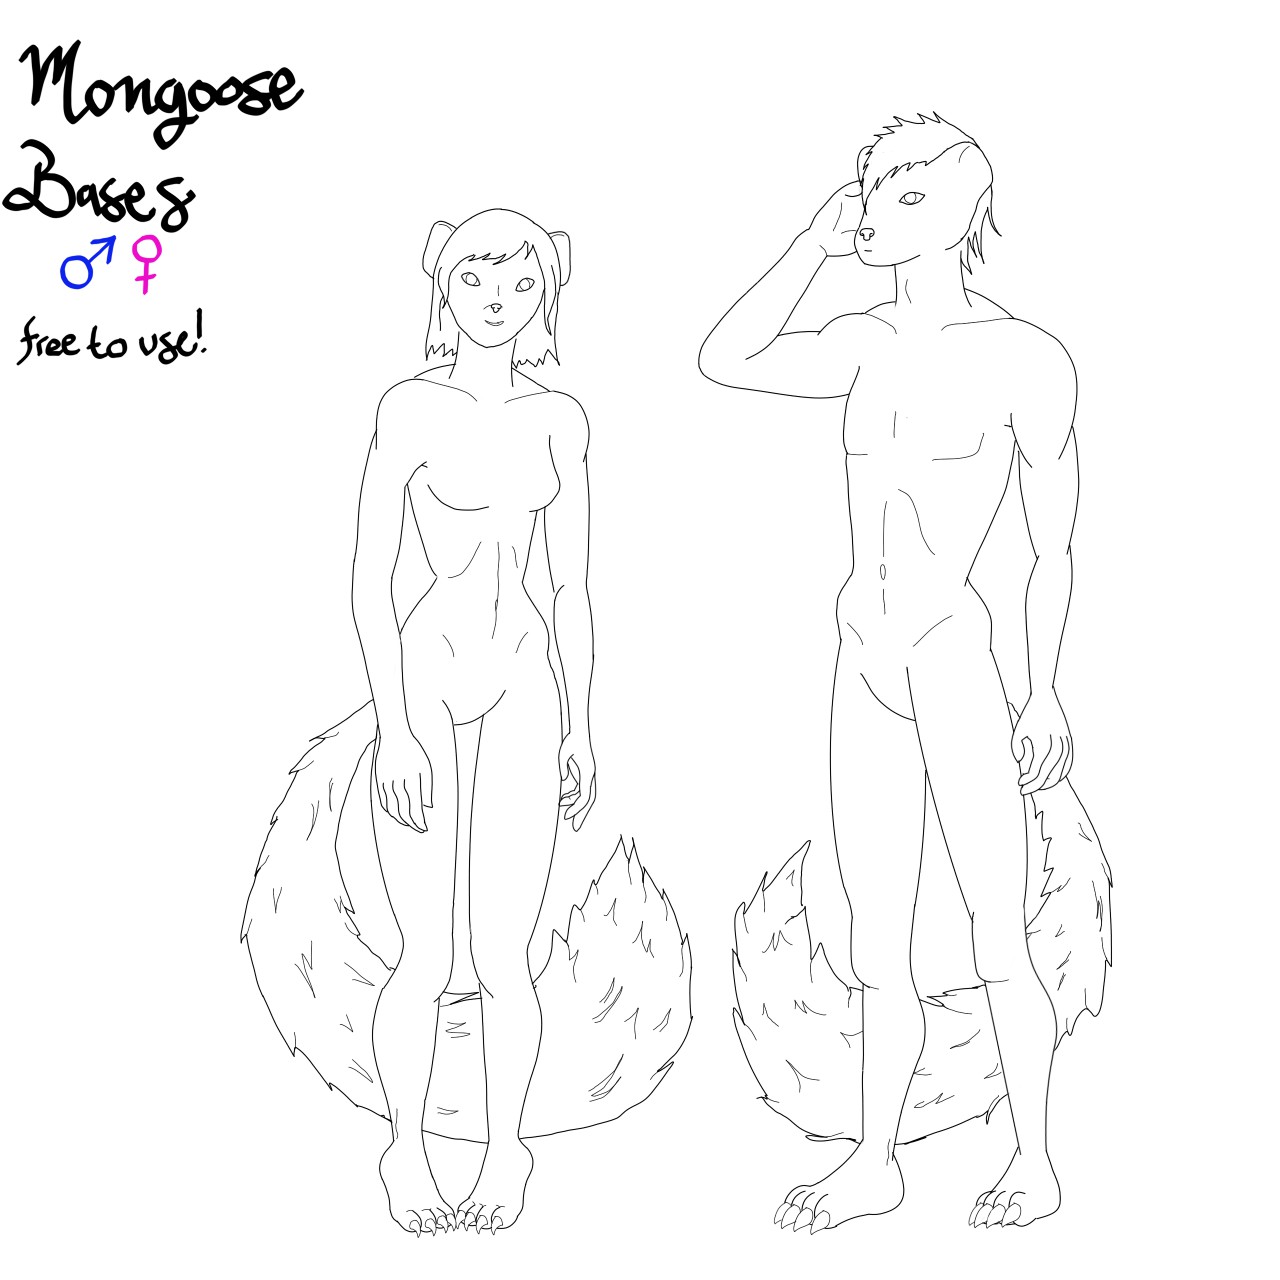 Mongoose Lineart Base Free To Use By Extinguishedhope Fur Affinity Dot Net Free character human 3d models are ready for lowpoly, rigged, animated, 3d printable, vr, ar or game. fur affinity dot net